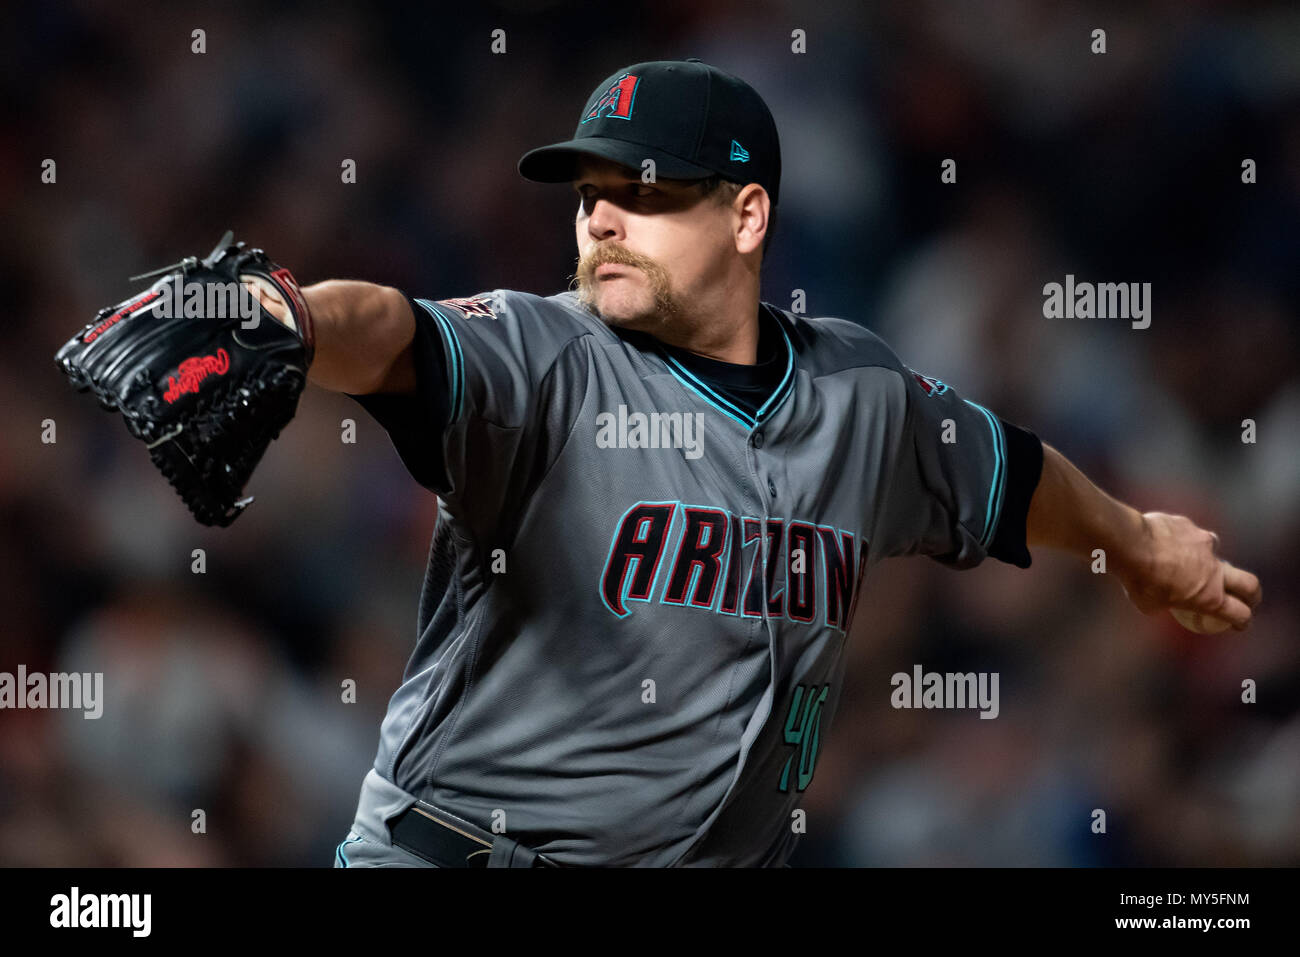 San Francisco, California, USA. 05th June, 2018. Arizona Diamondbacks  relief pitcher Andrew Chafin (40) delivers in the seventh inning, during a  MLB game between the Arizona Diamondbacks and the San Francisco Giants